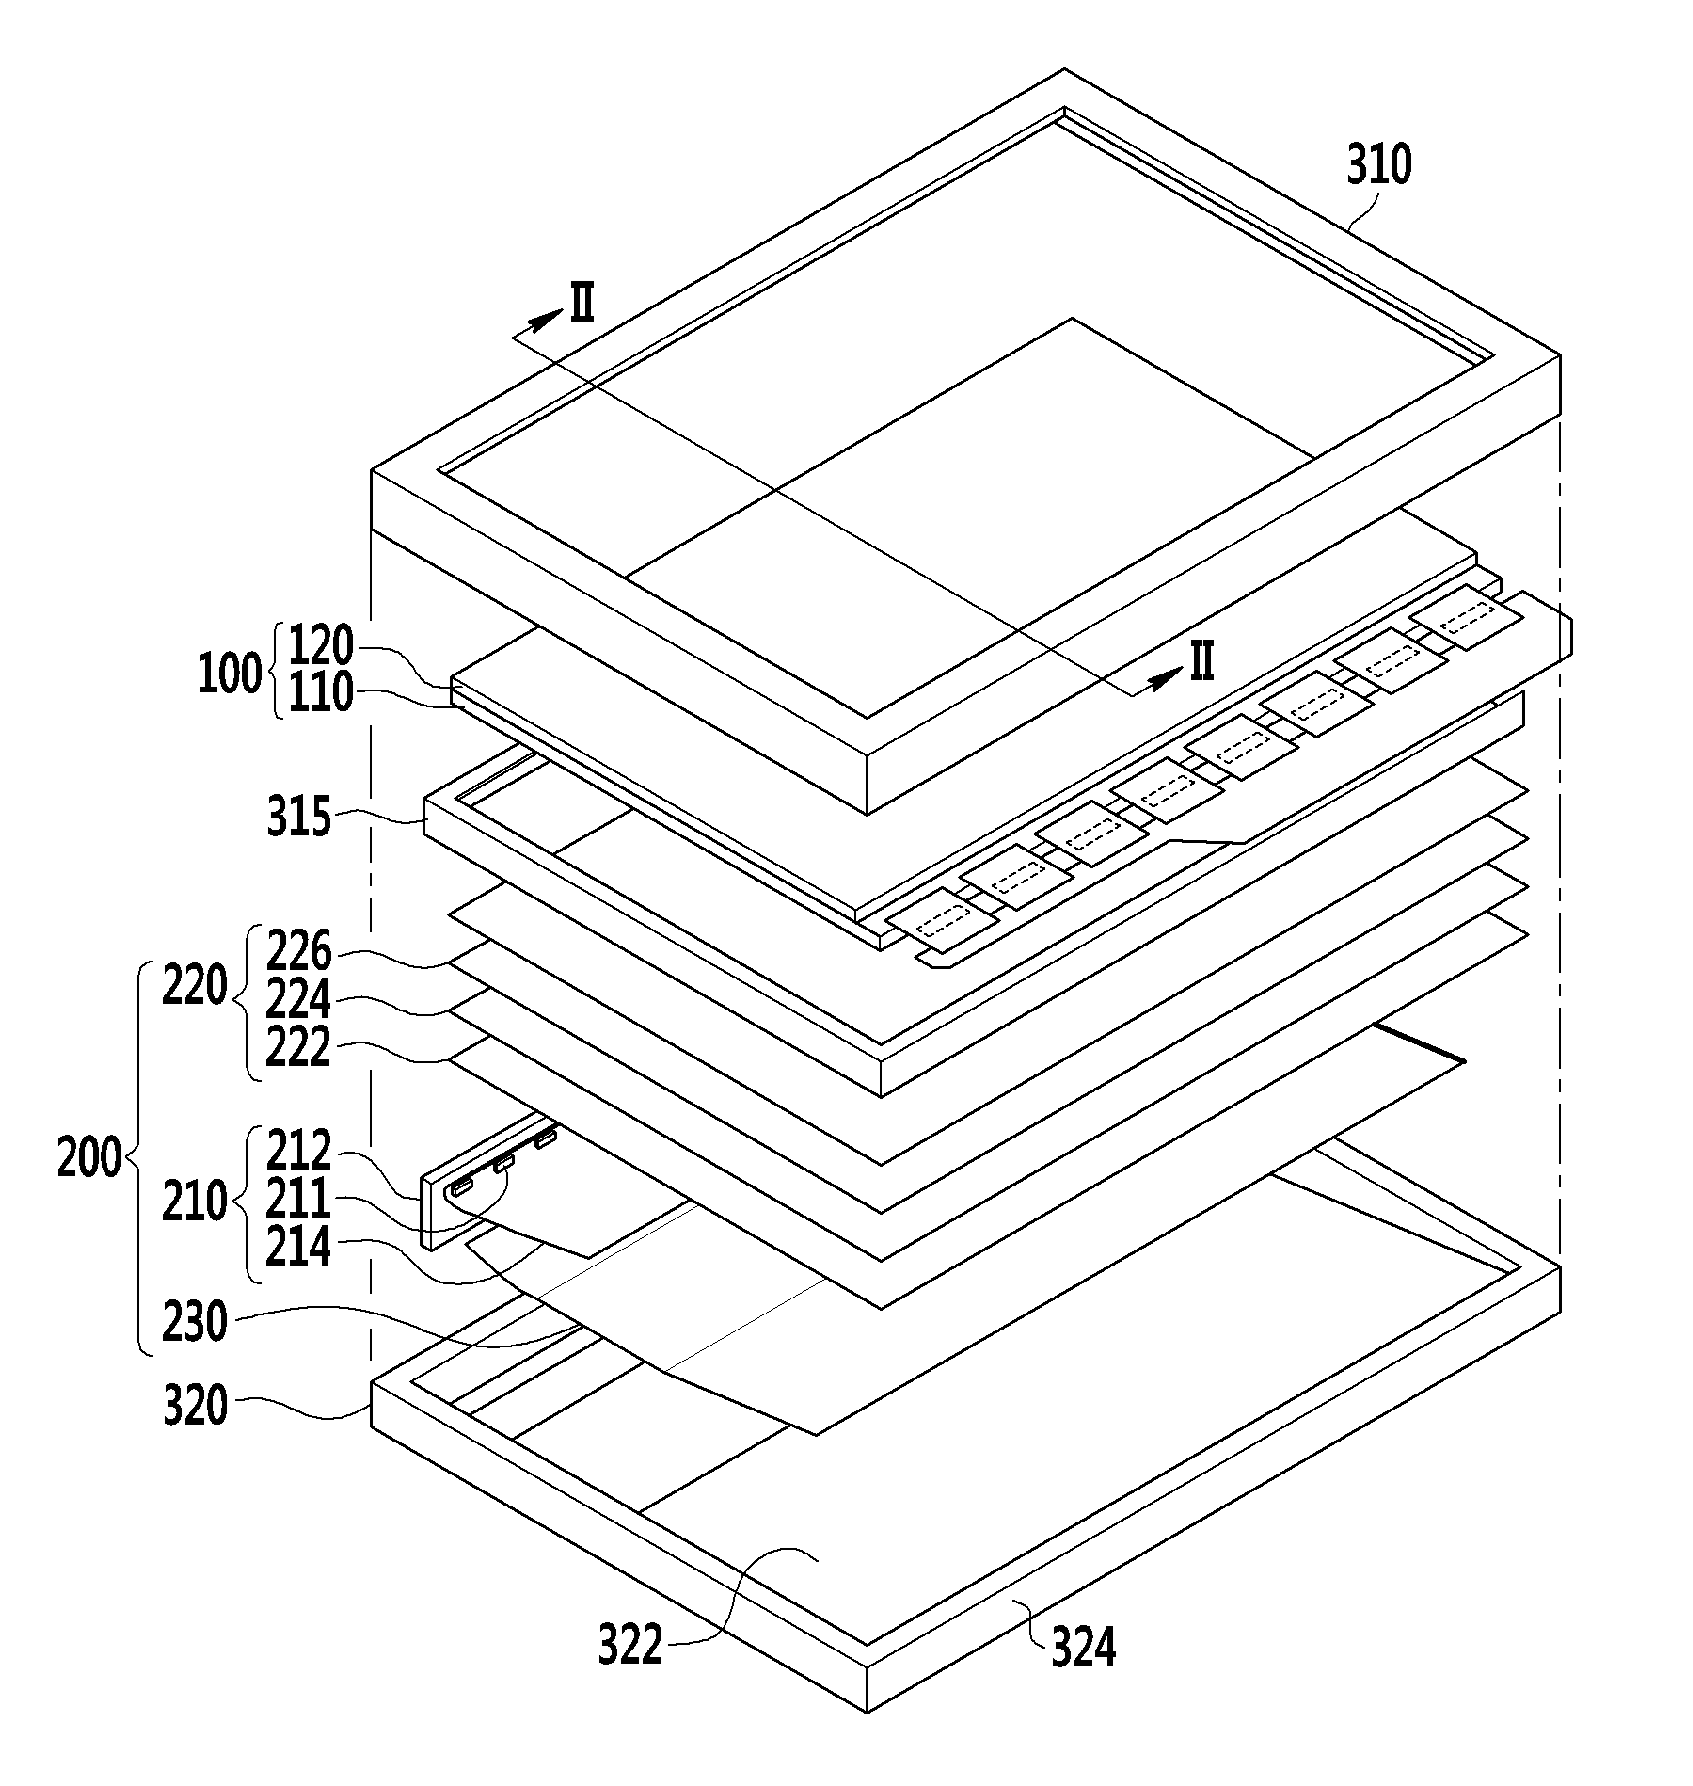 Display device comprising the same